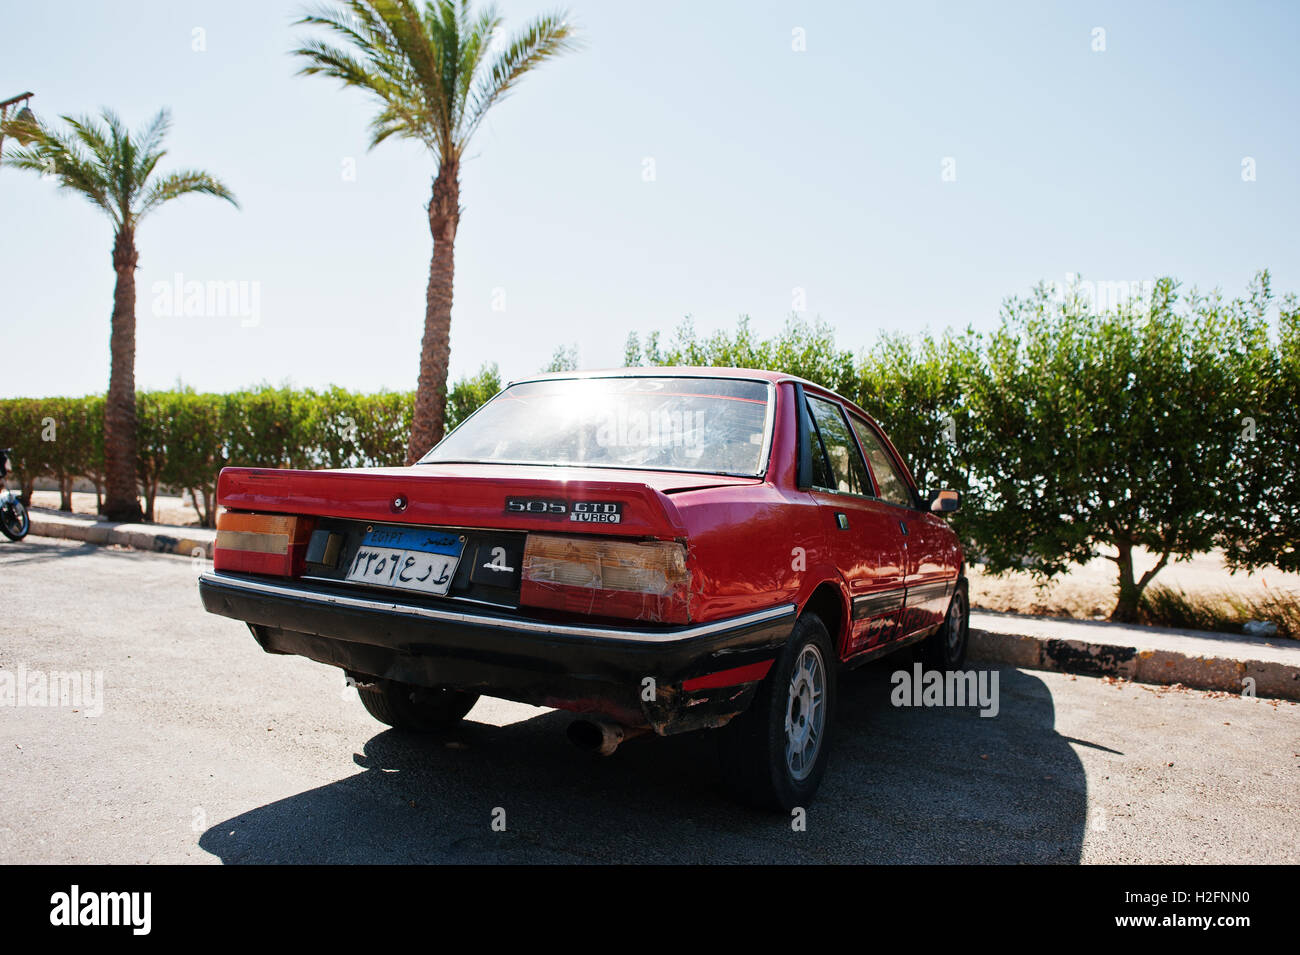 Hurghada, Egypt -20 August 2016: Peugeot 505 GT car with Egypt license plate Stock Photo